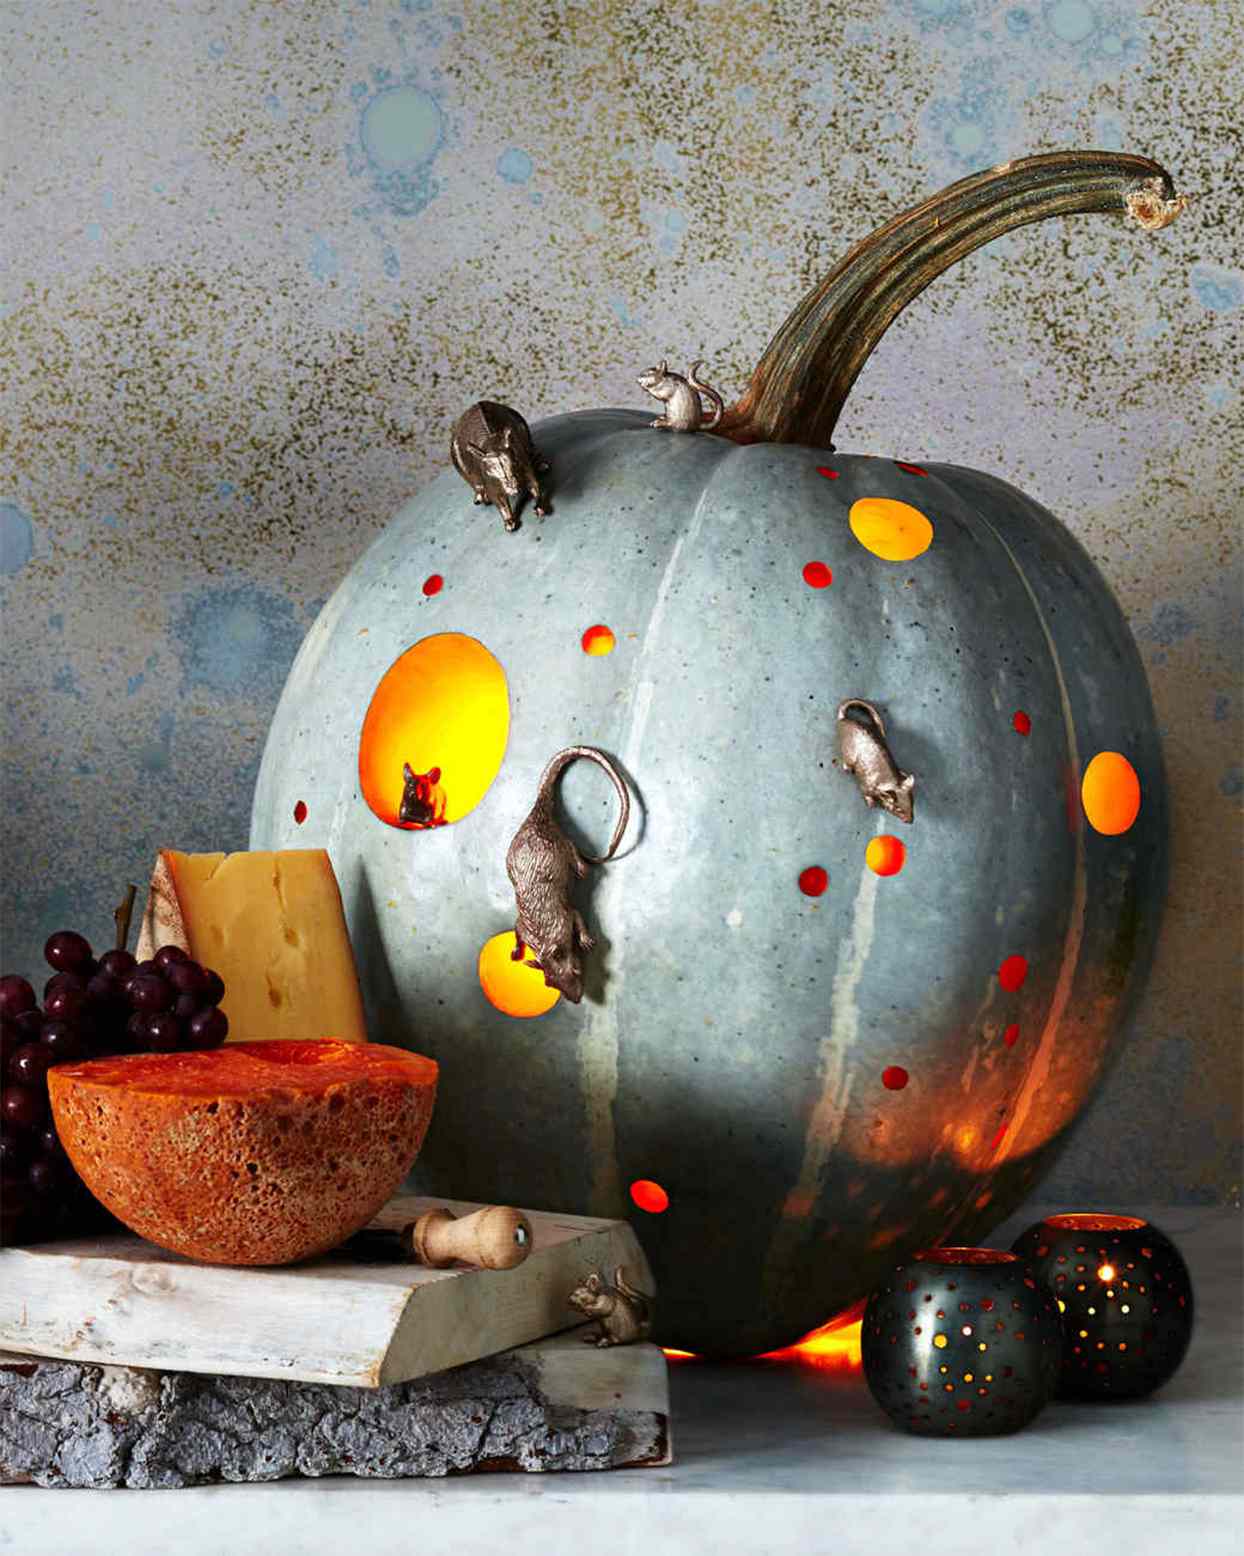 Best pumpkin carving and decorating ideas